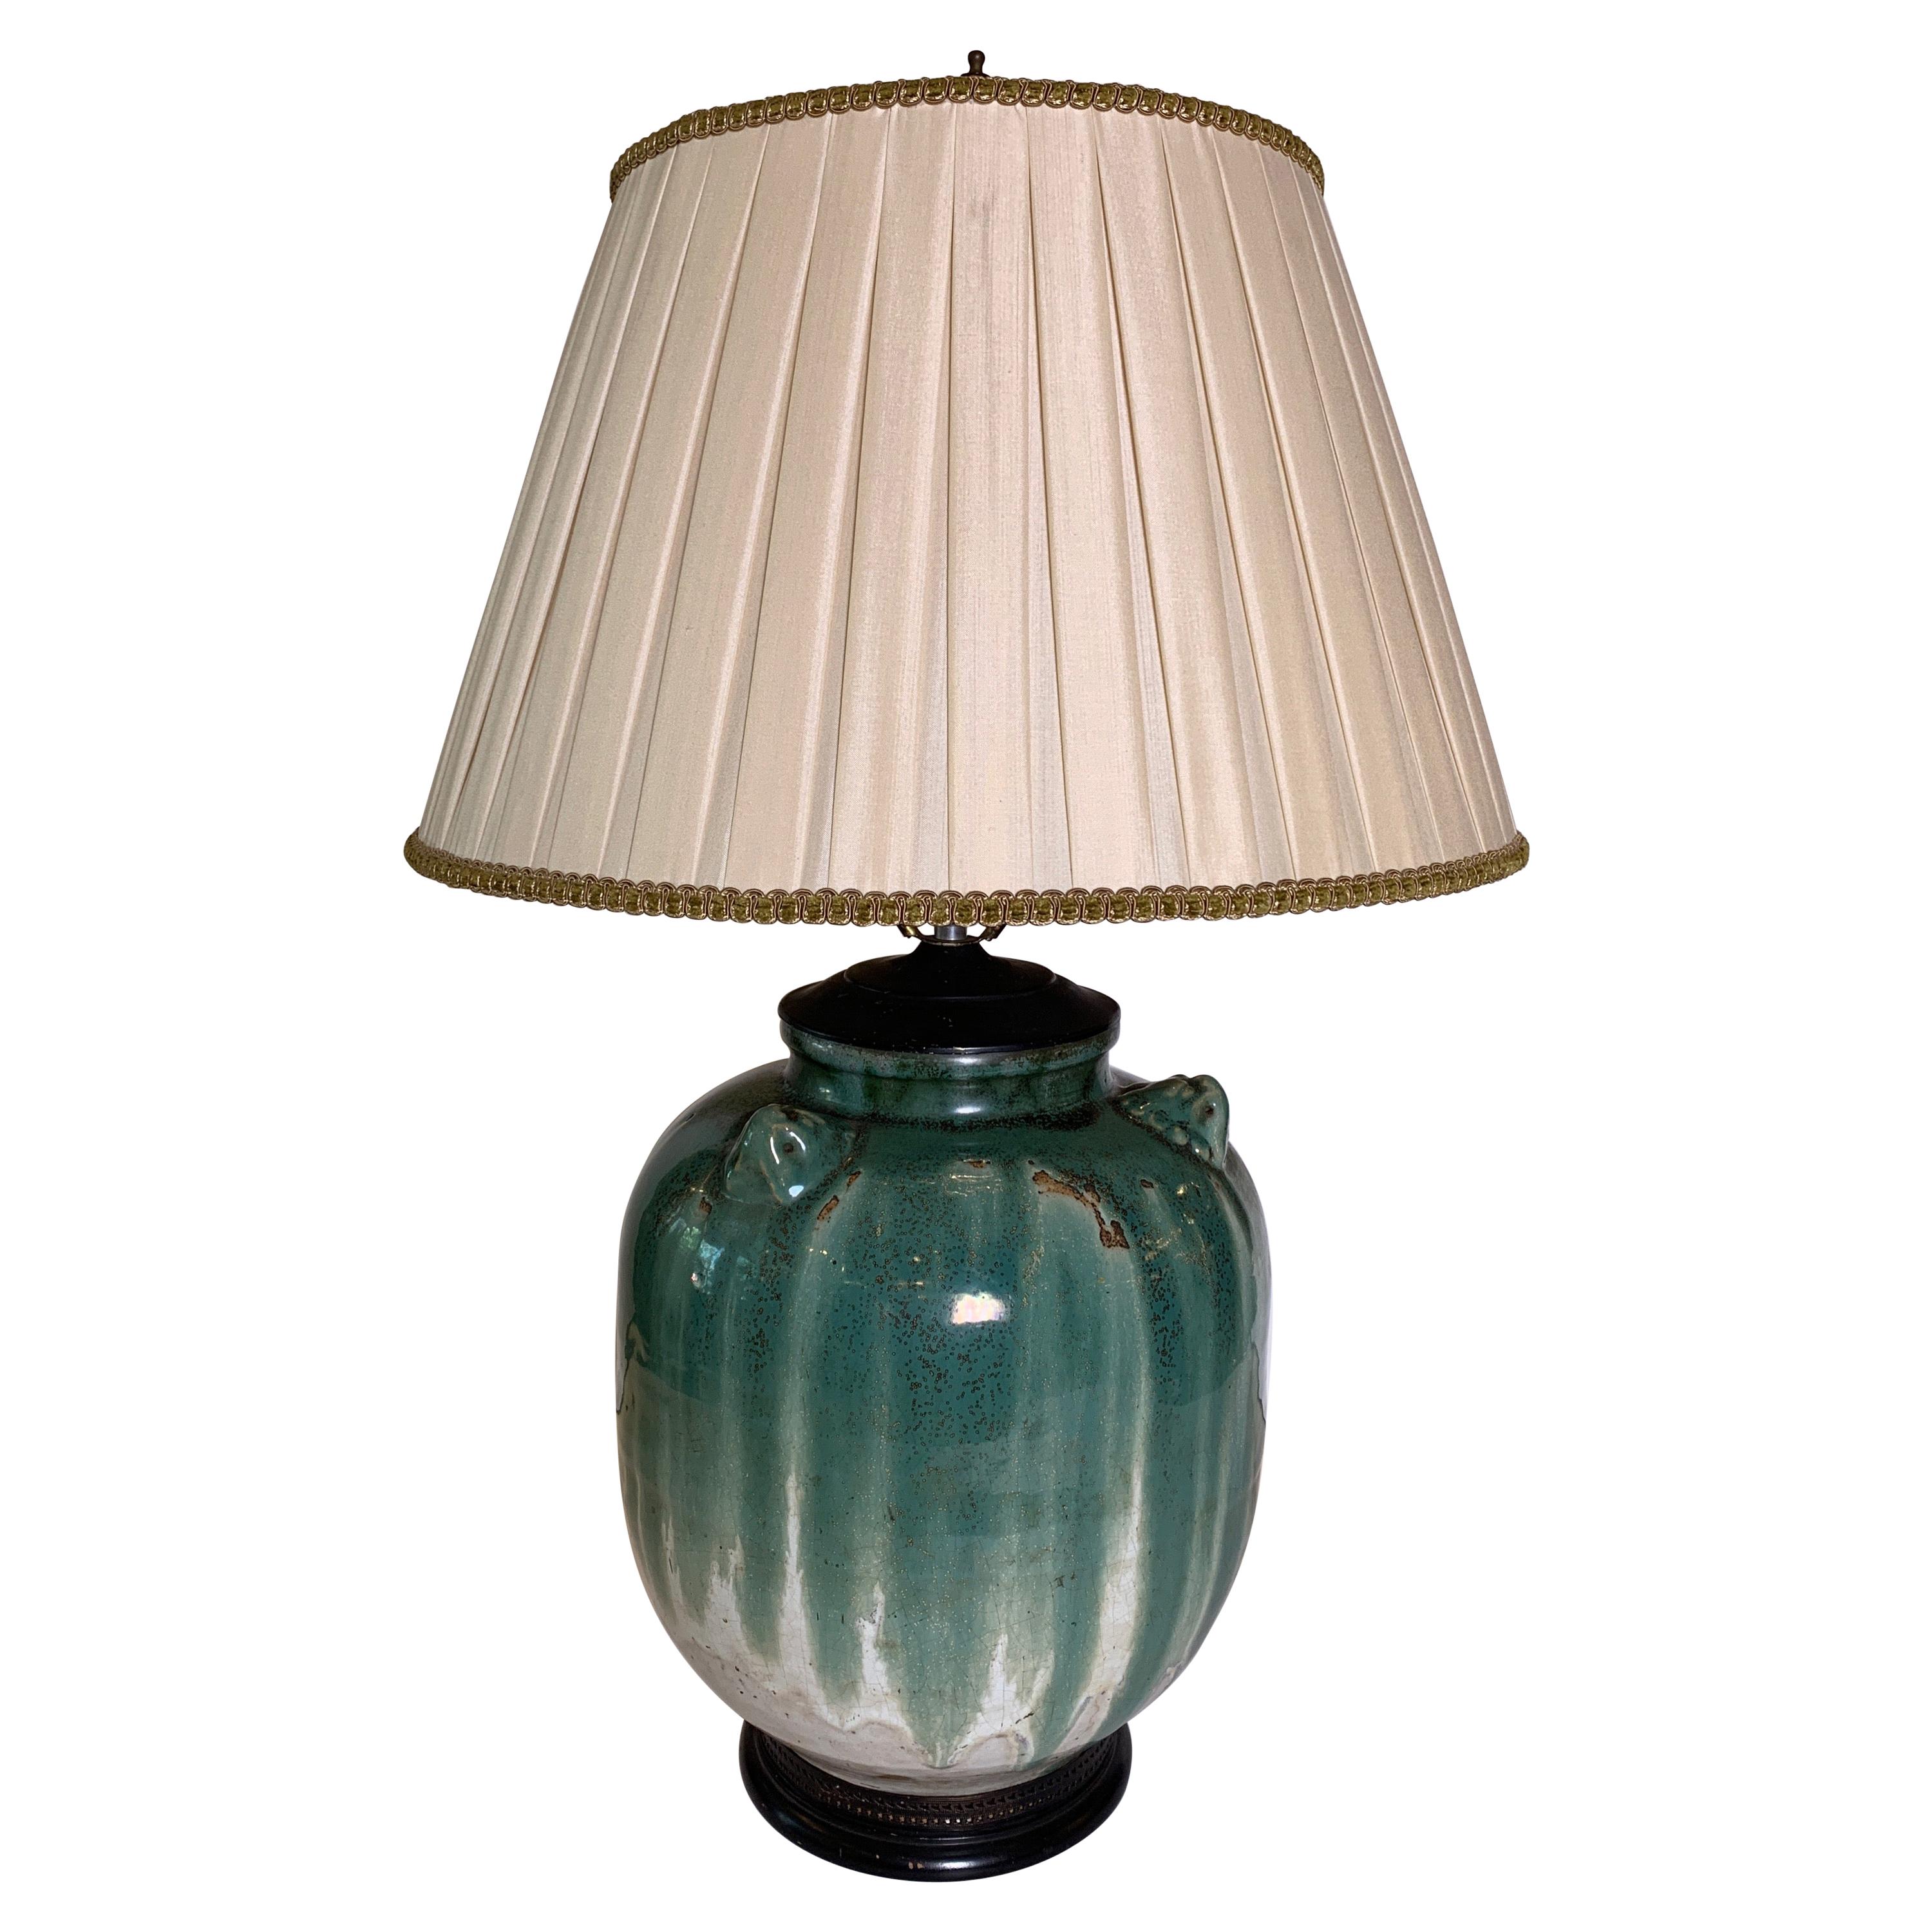 Early 20th Century Asian Pottery Vase Table Lamp